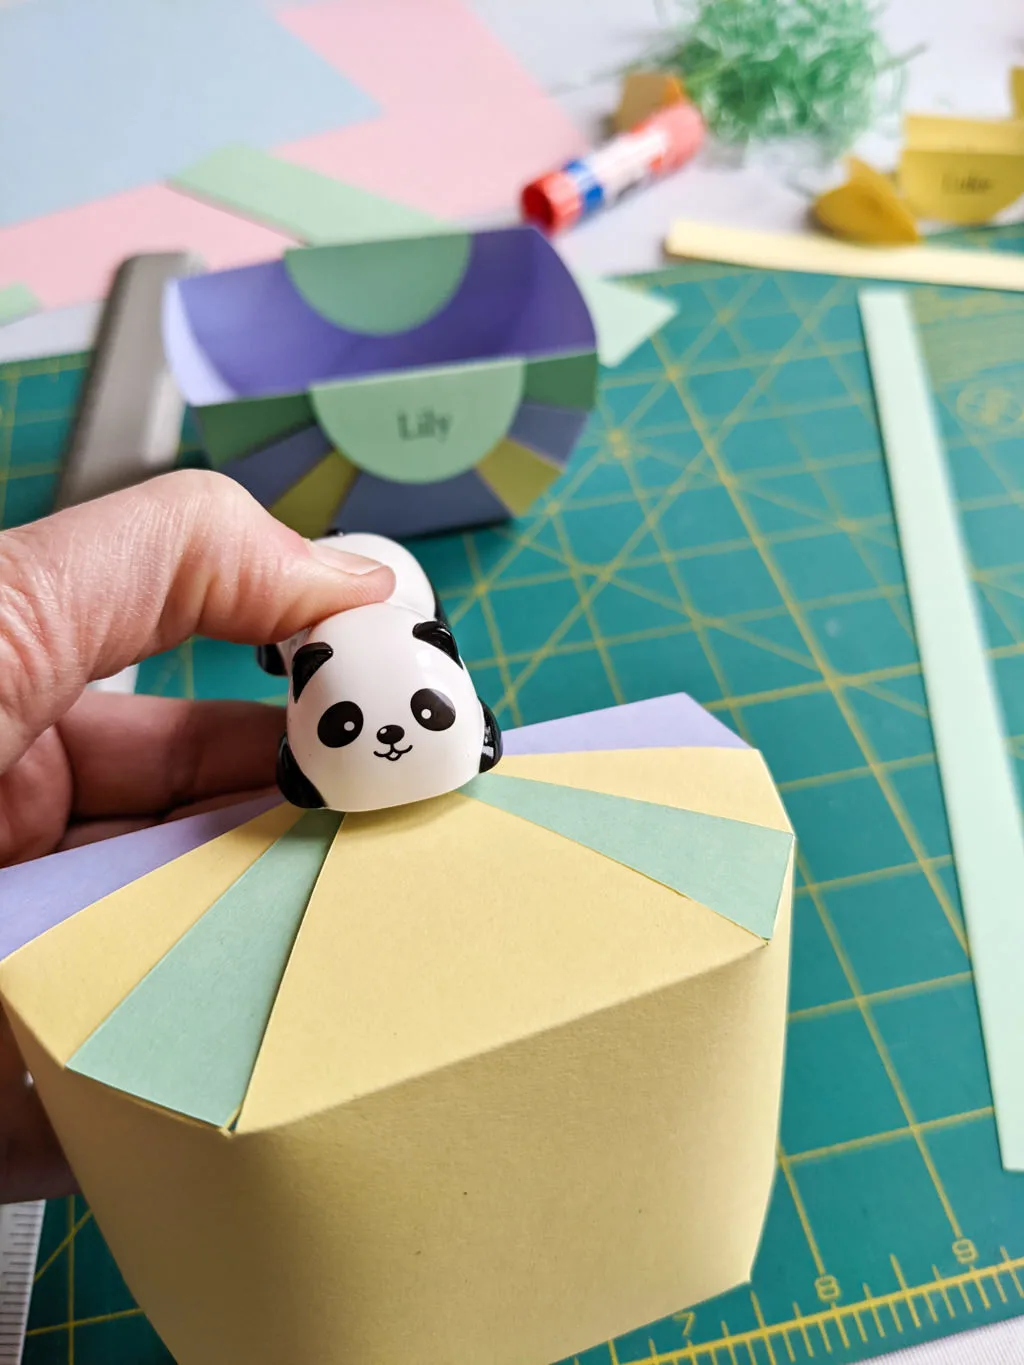 Making tiny paper Easter baskets with folded paper and a stapler